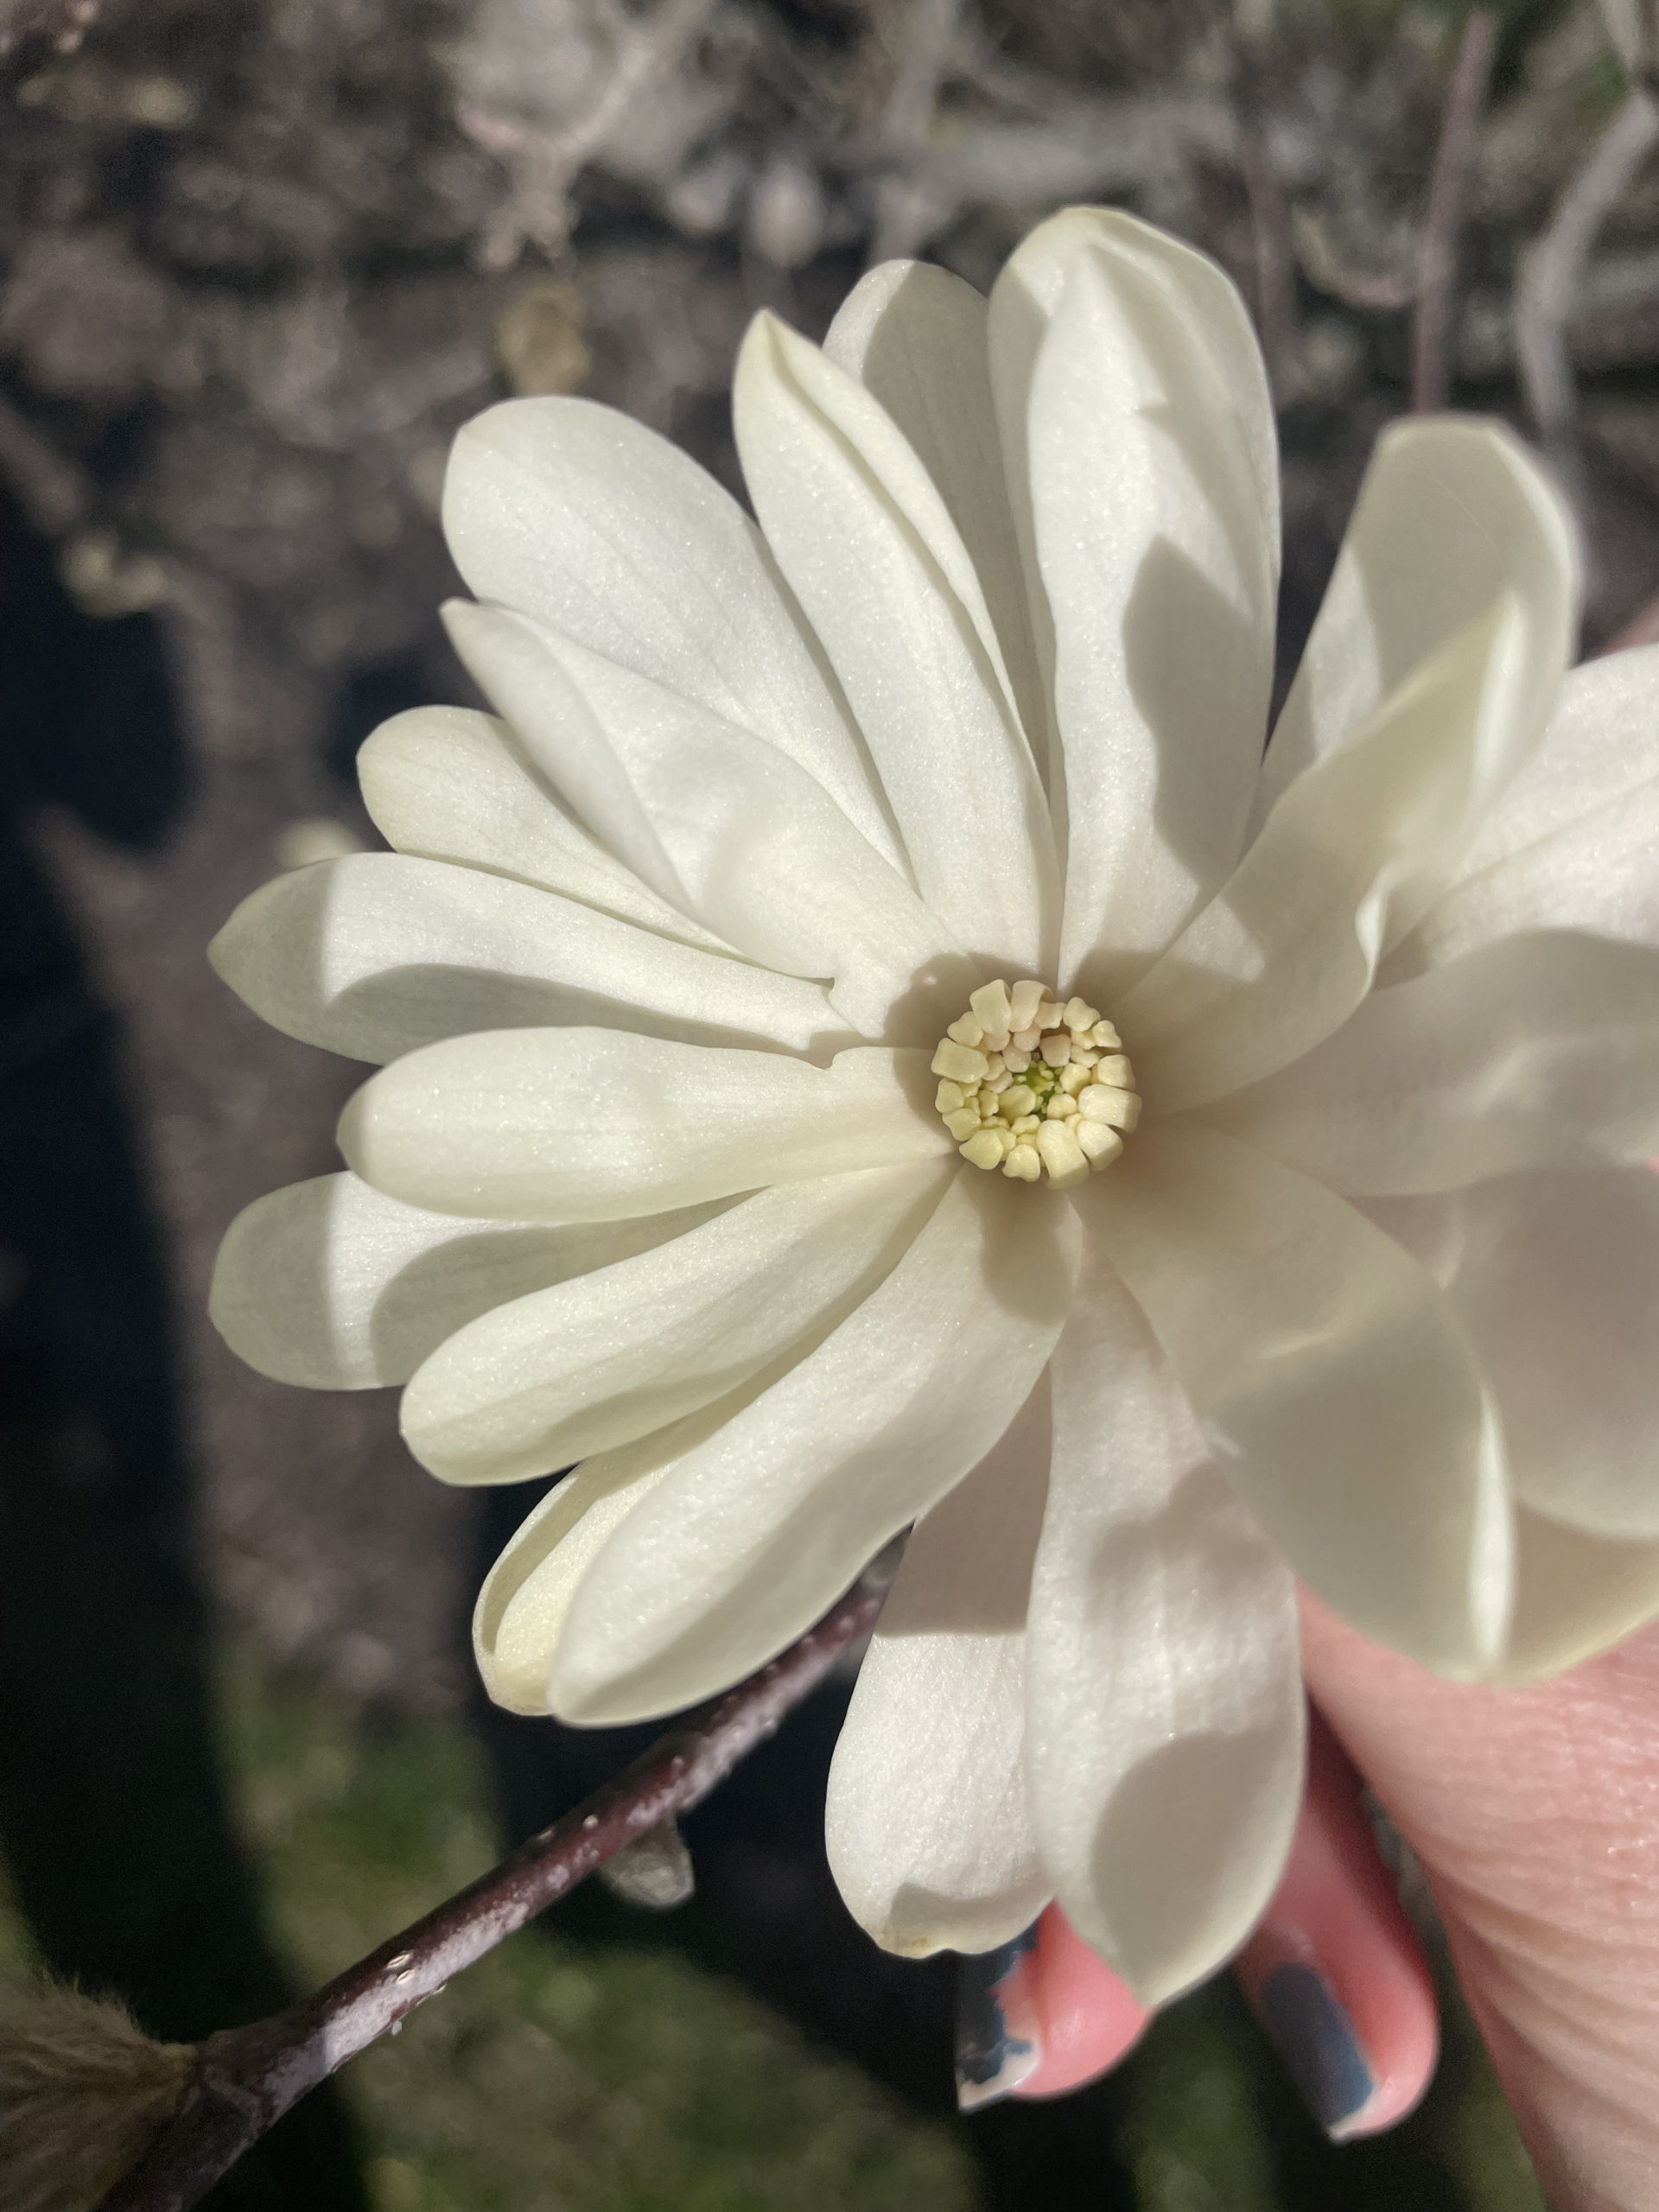 Flower of the Royal Star Magnolia trees. Flower is white white oval-shaped petals